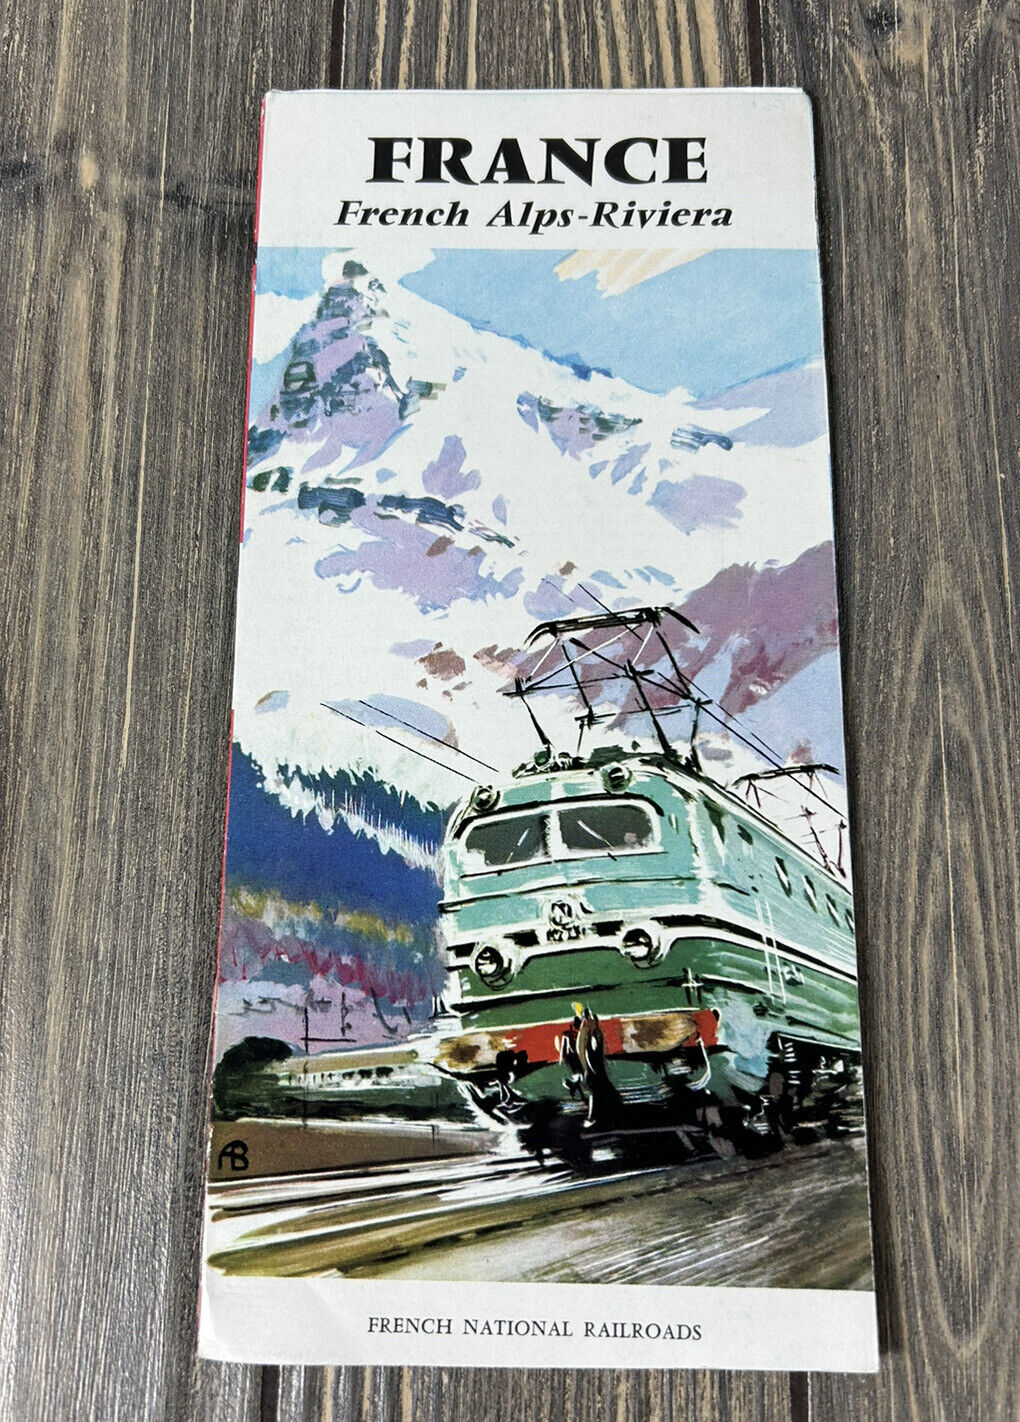 Vintage France French Alps-Riviera French National Railroads Brochure Pamphlet